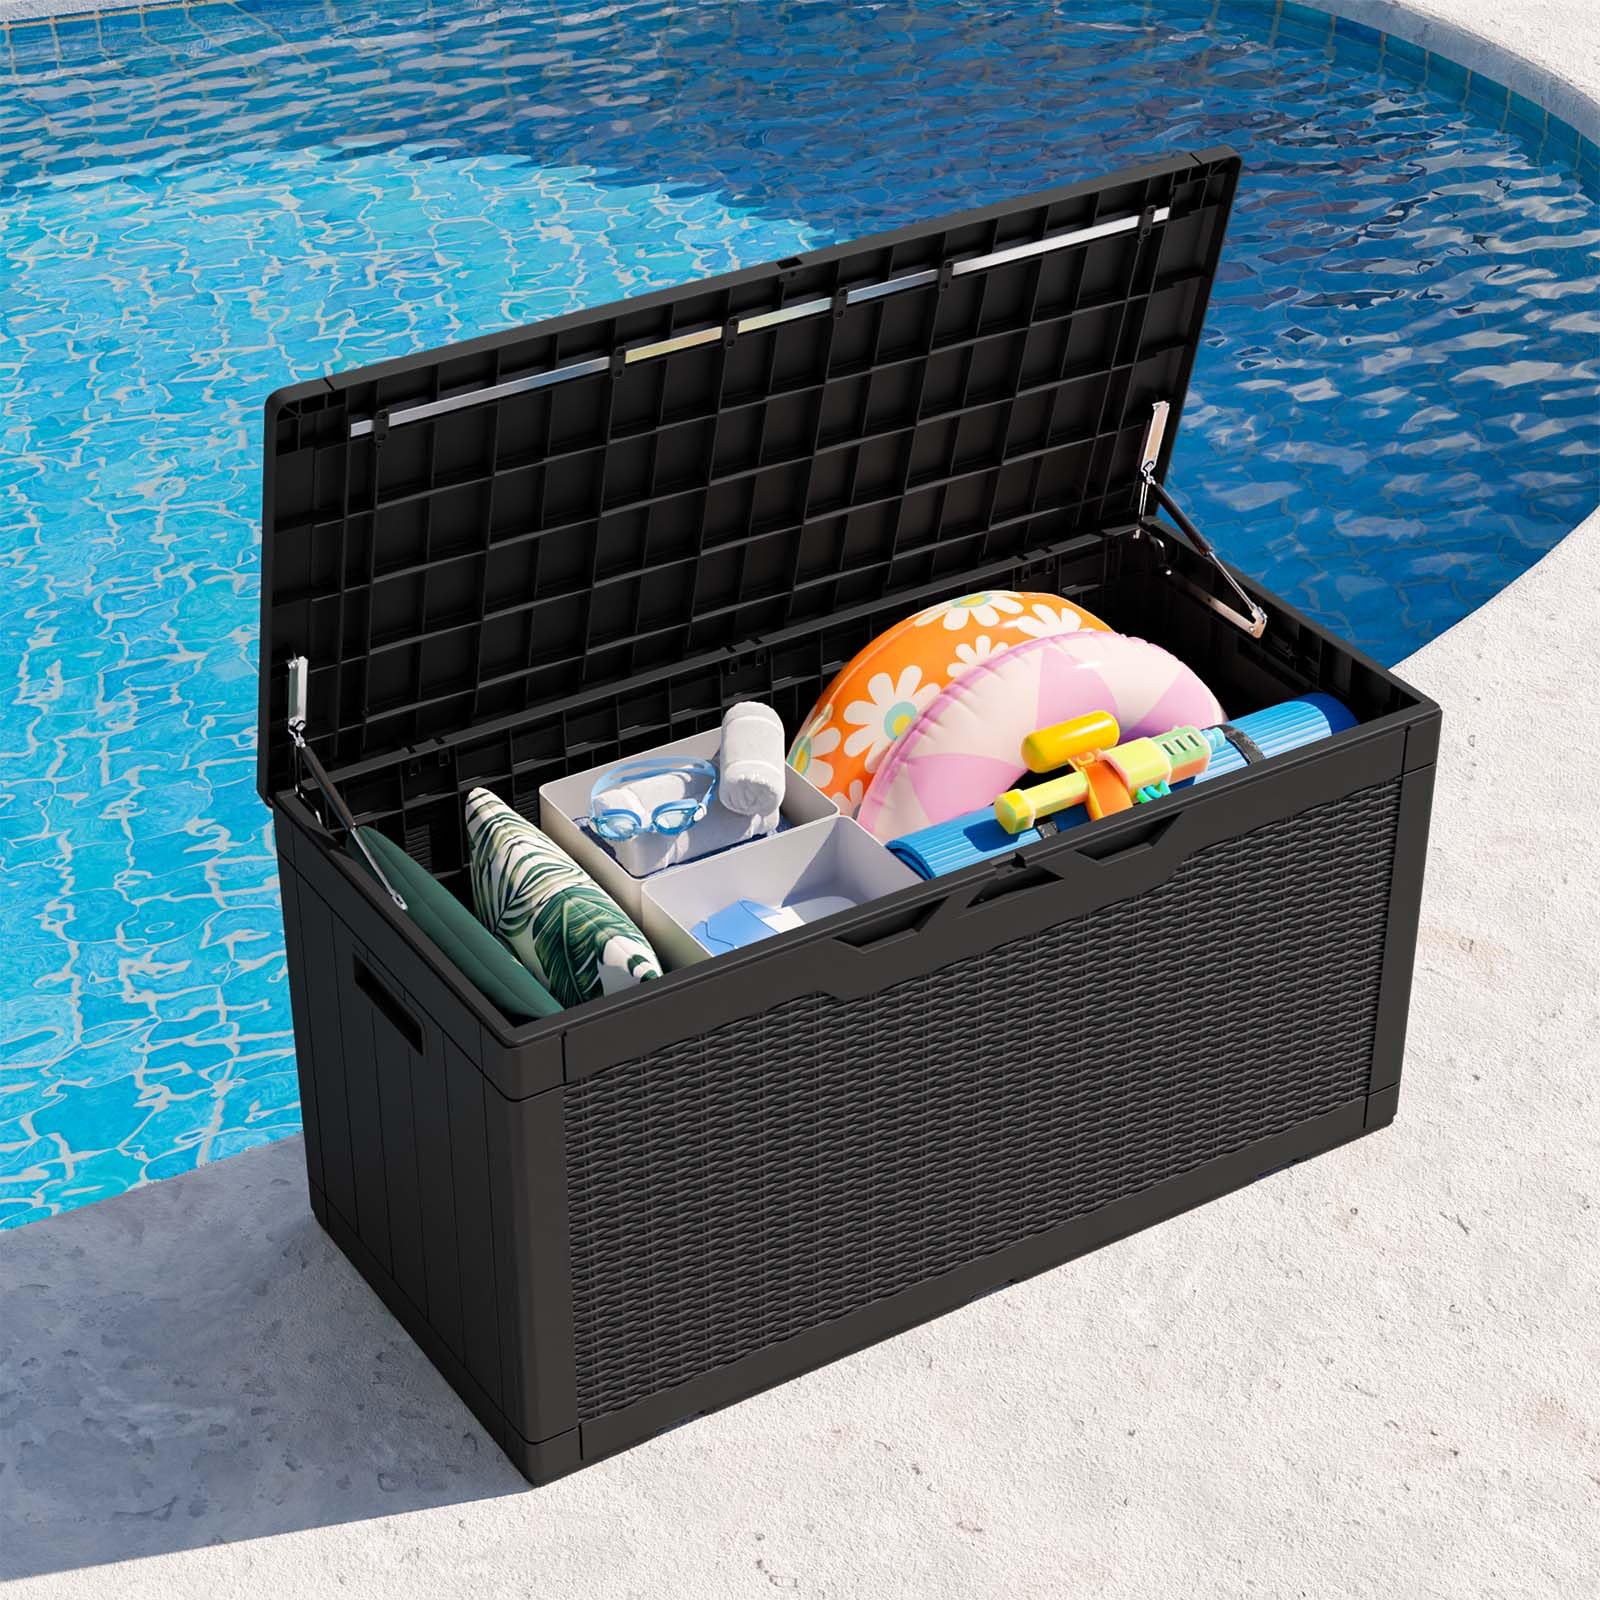 Patiowell 31 Gallon Deck Box, Waterproof Resin Outdoor Storage Box for Patio Furniture, Pool Accessories, Toys, Garden Tools and Sports Equipment, Lockable, Brown